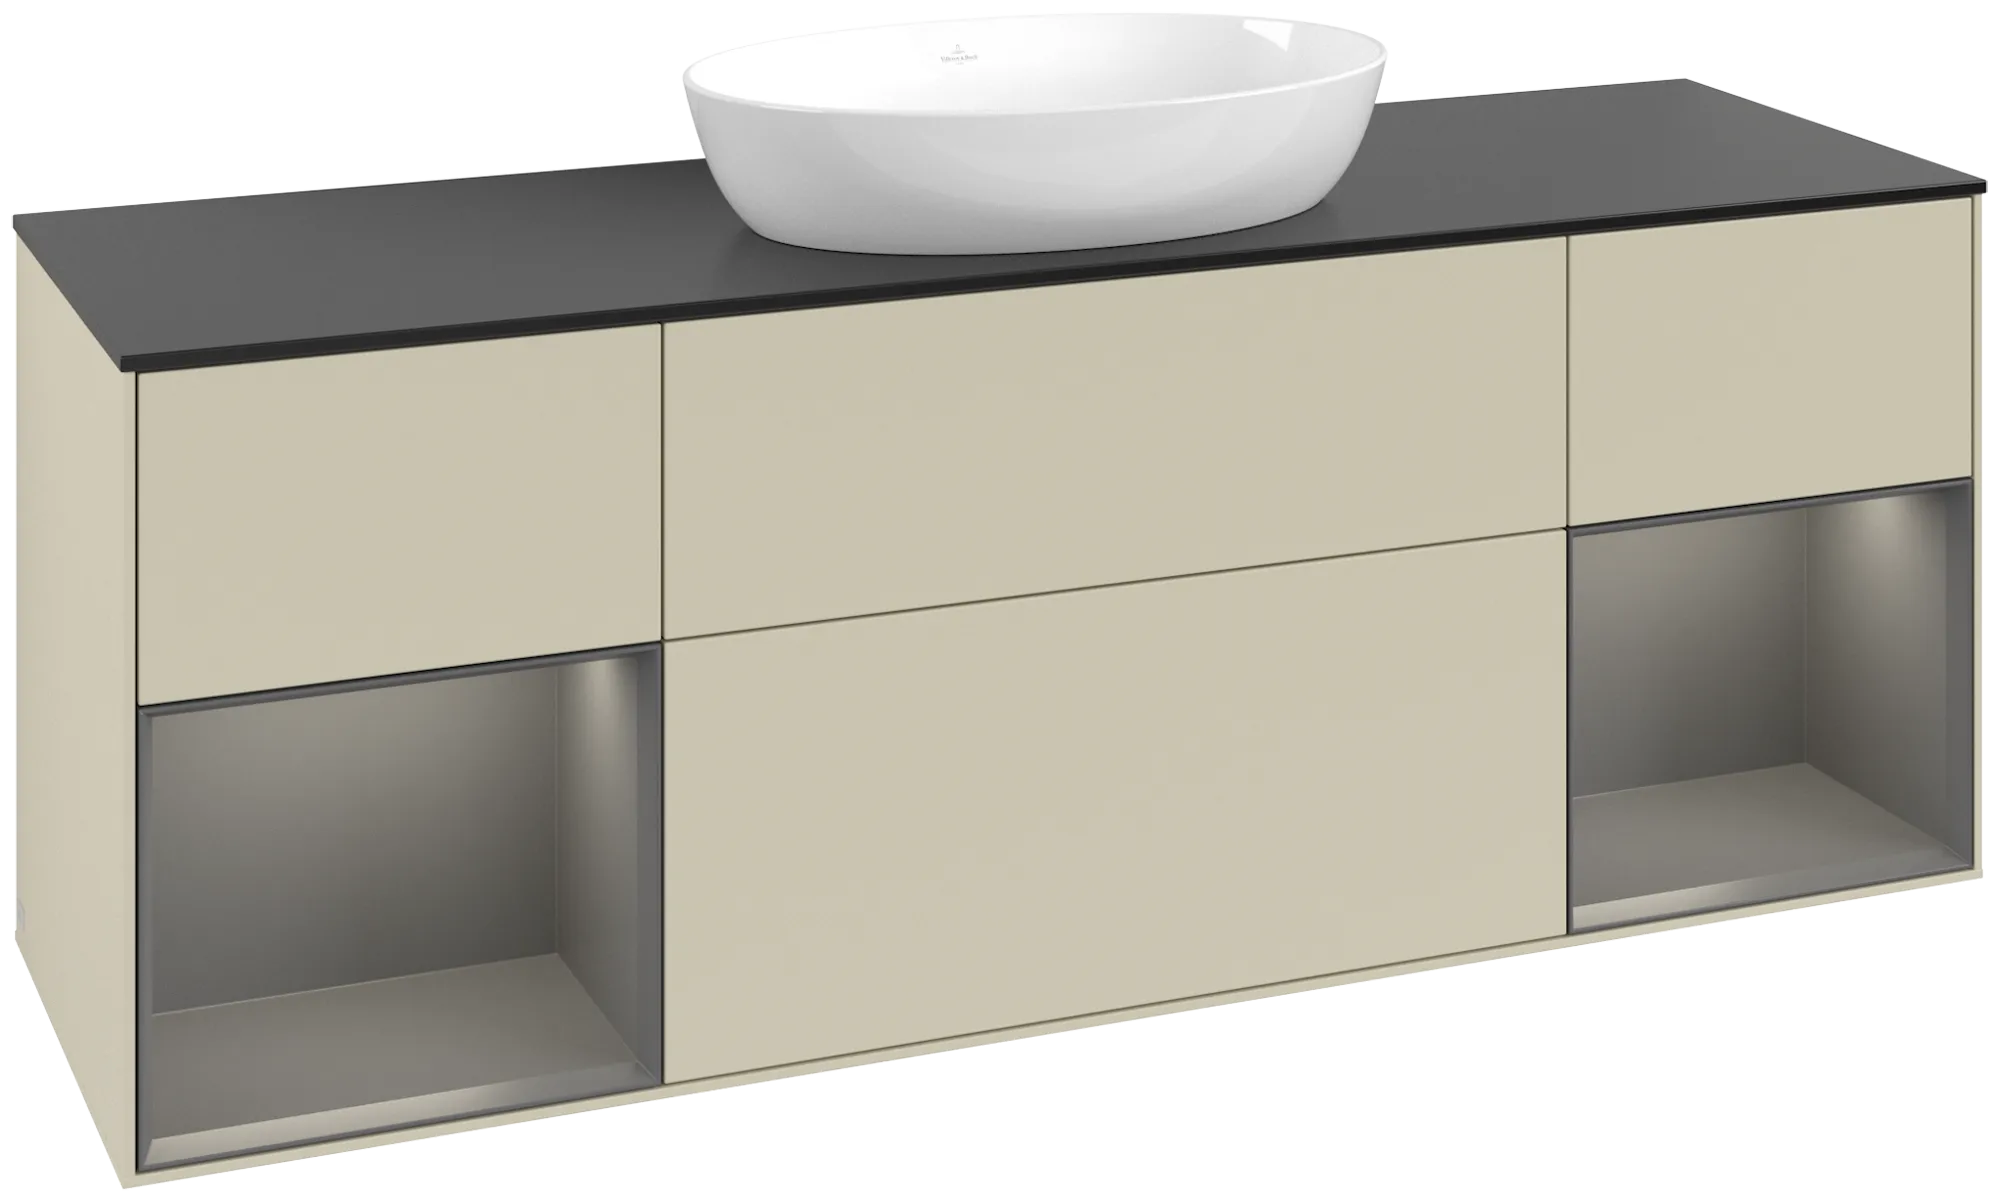 Picture of VILLEROY BOCH Finion Vanity unit, with lighting, 4 pull-out compartments, 1600 x 603 x 501 mm, Silk Grey Matt Lacquer / Anthracite Matt Lacquer / Glass Black Matt #GD02GKHJ